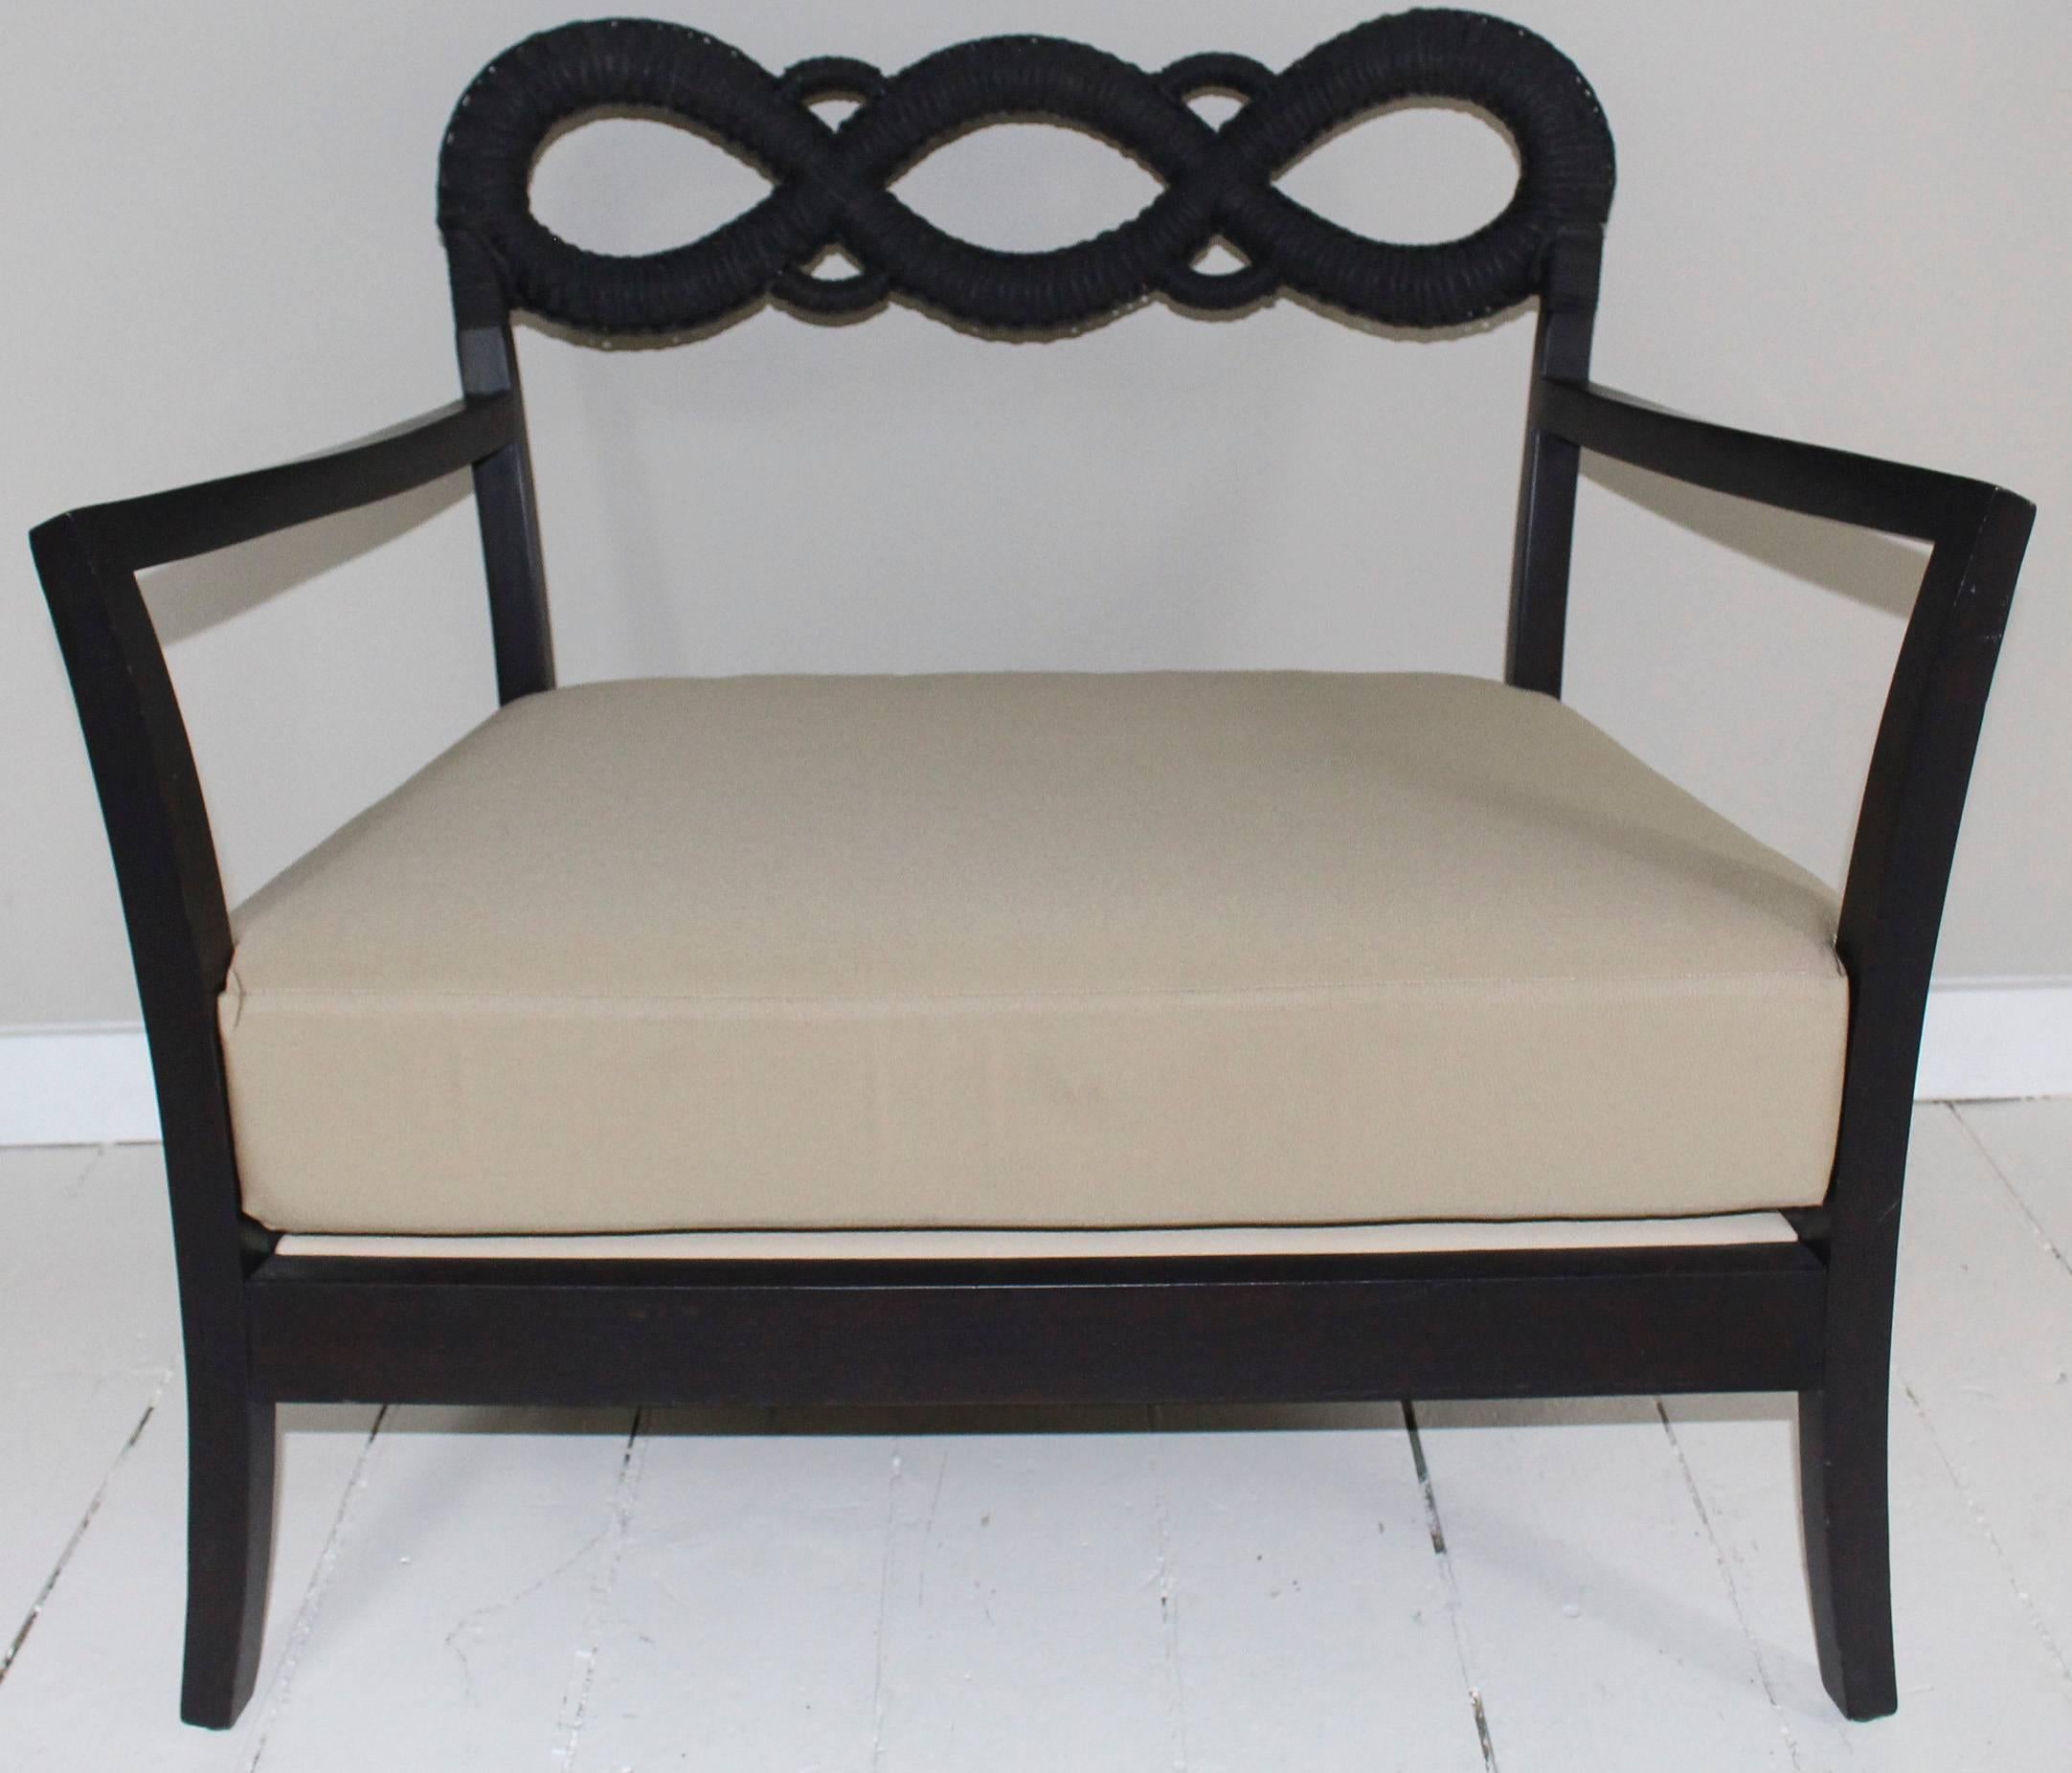 Ebonized oversized side chair with decorative rope backrest and outward slanted armrests. Chair is wider, deeper and lower than the usual seat. Neutral seat cushion with similar flange-edged lumbar back pillow.